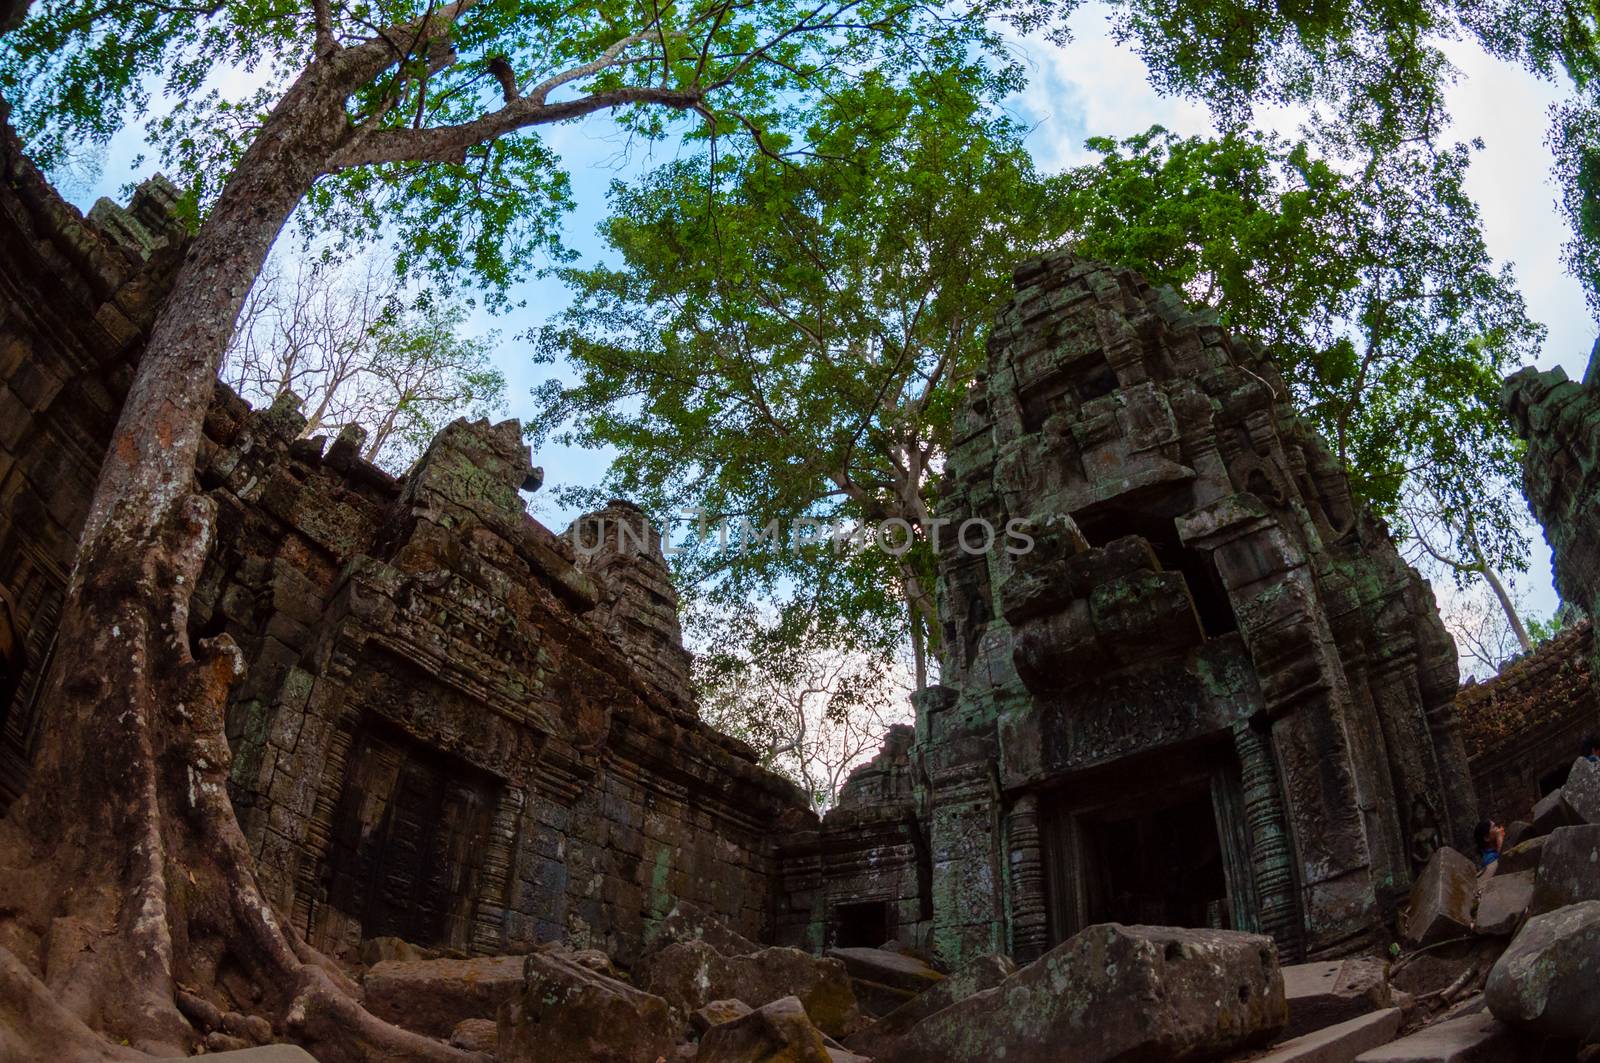 Tree and temple from below Ta Prohm Angkor Wat